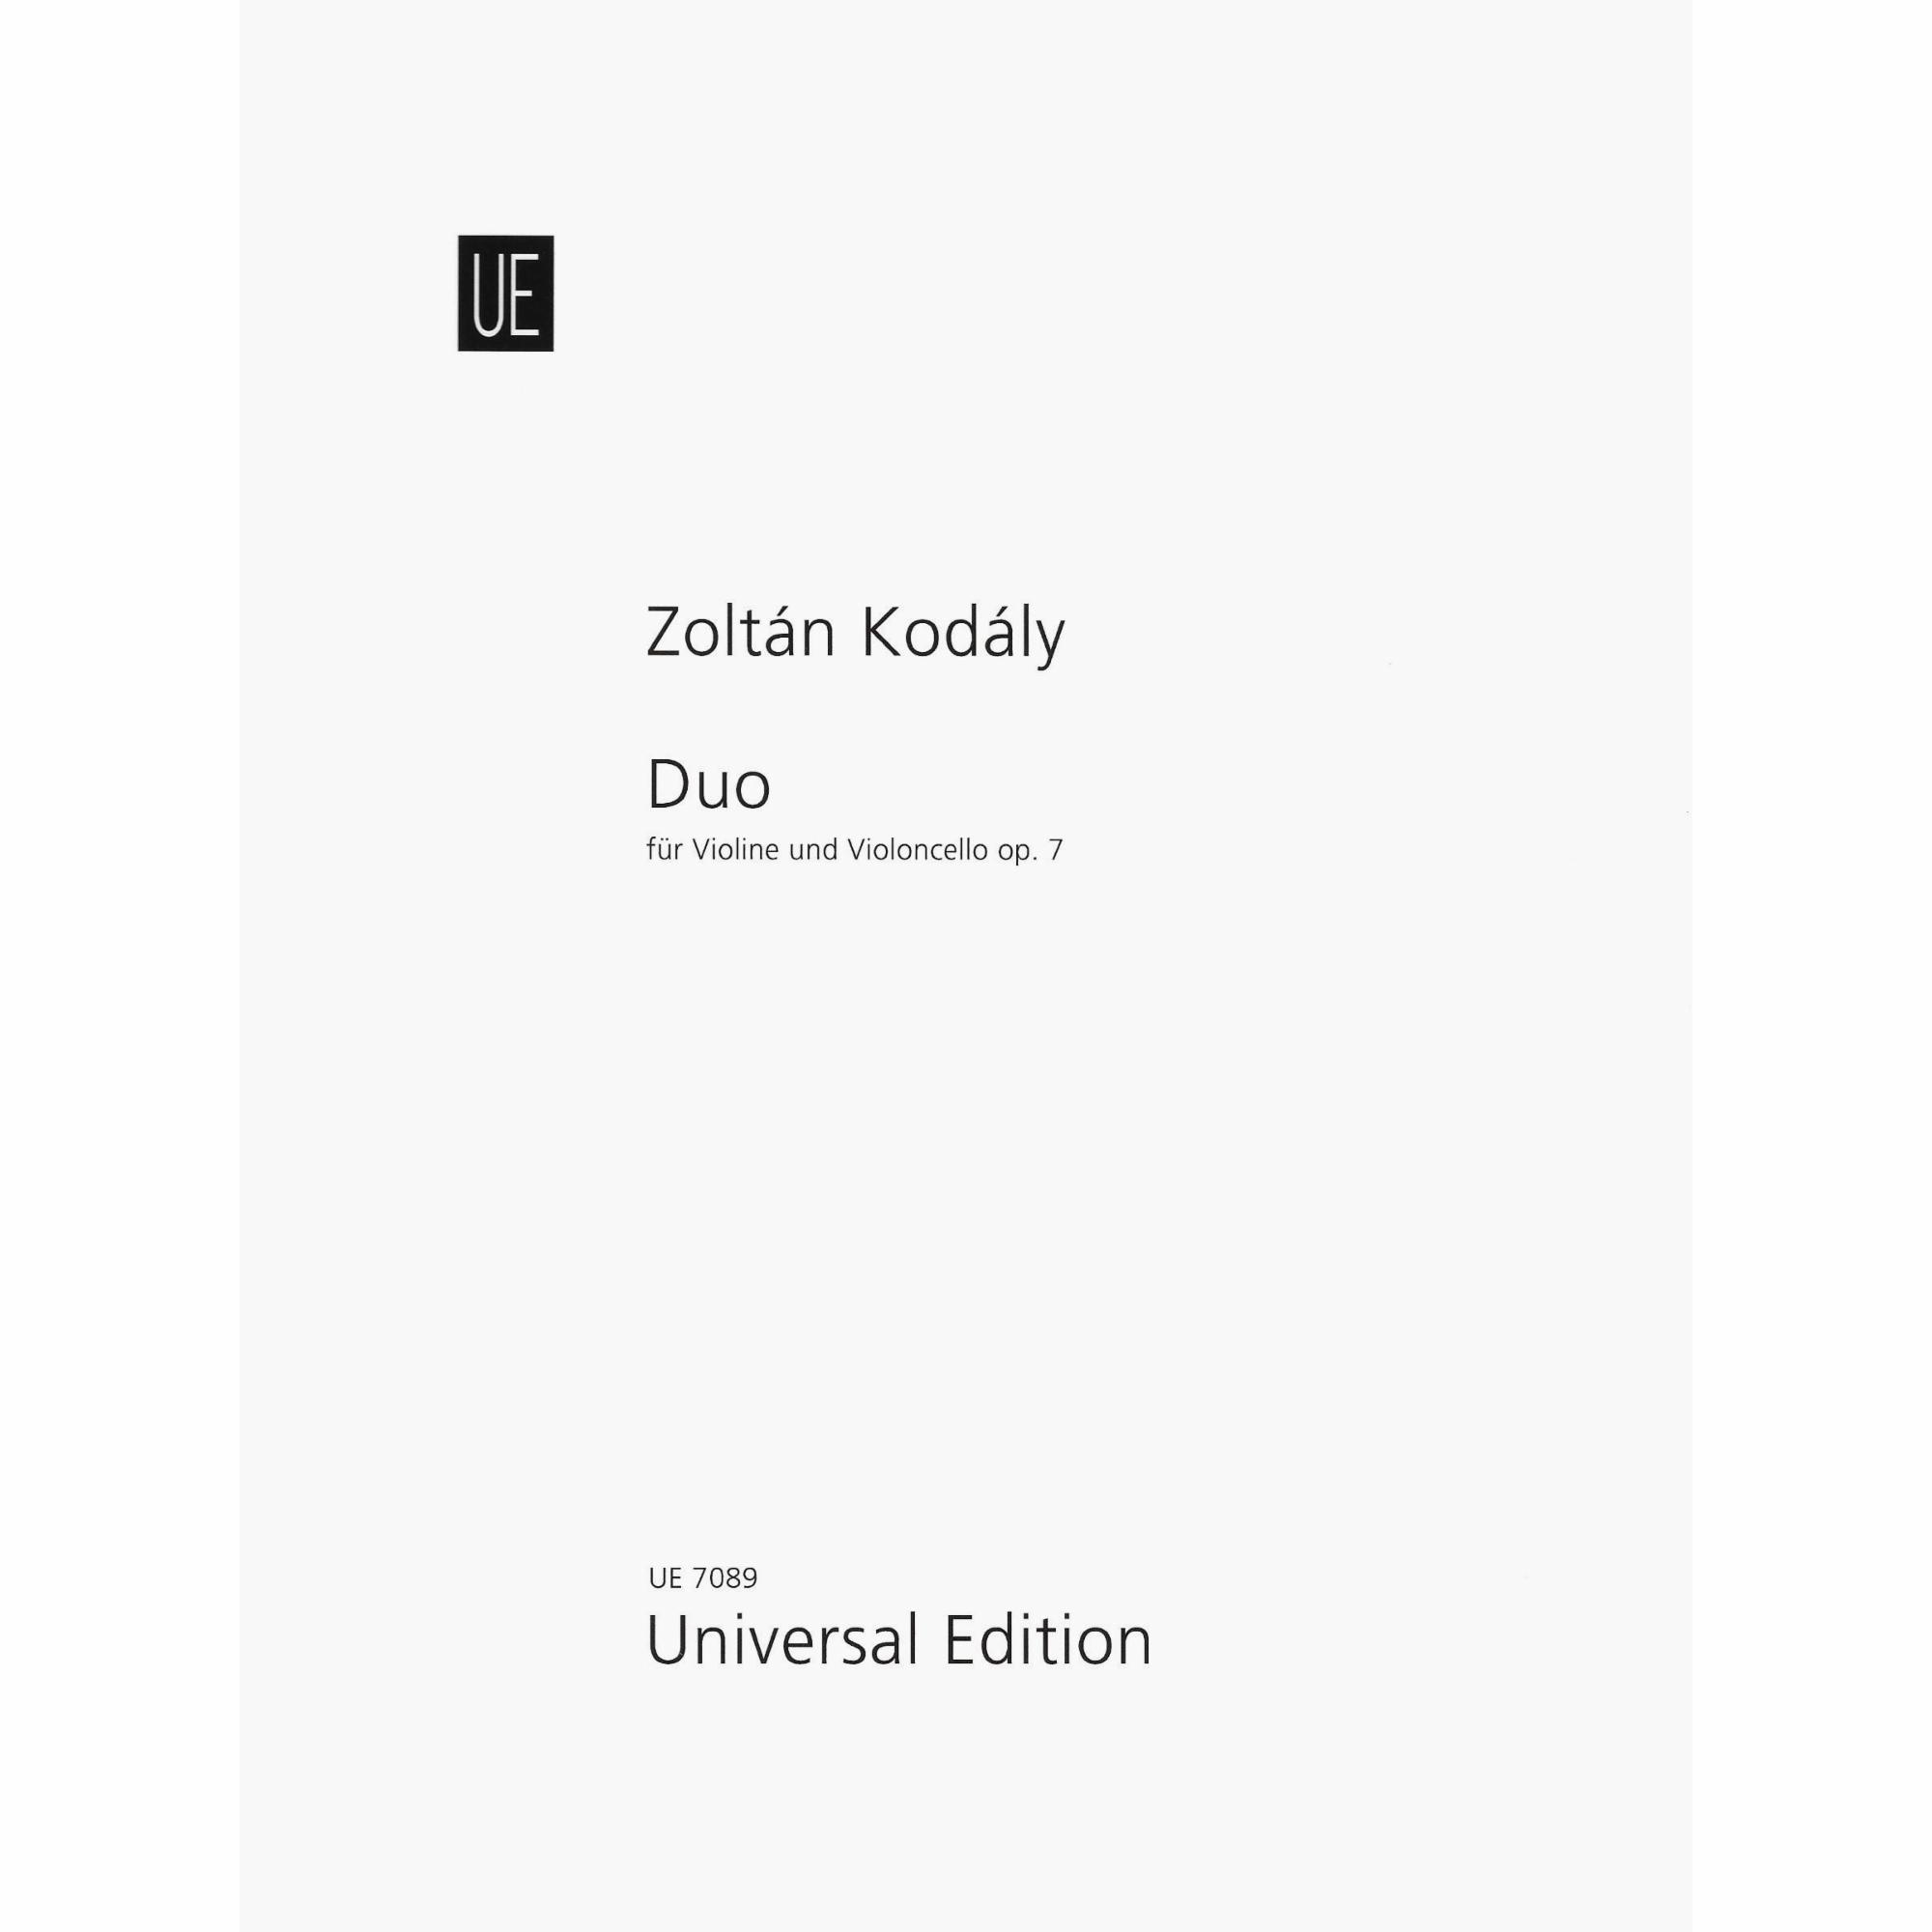 Kodaly -- Duo, Op. 7 for Violin and Cello